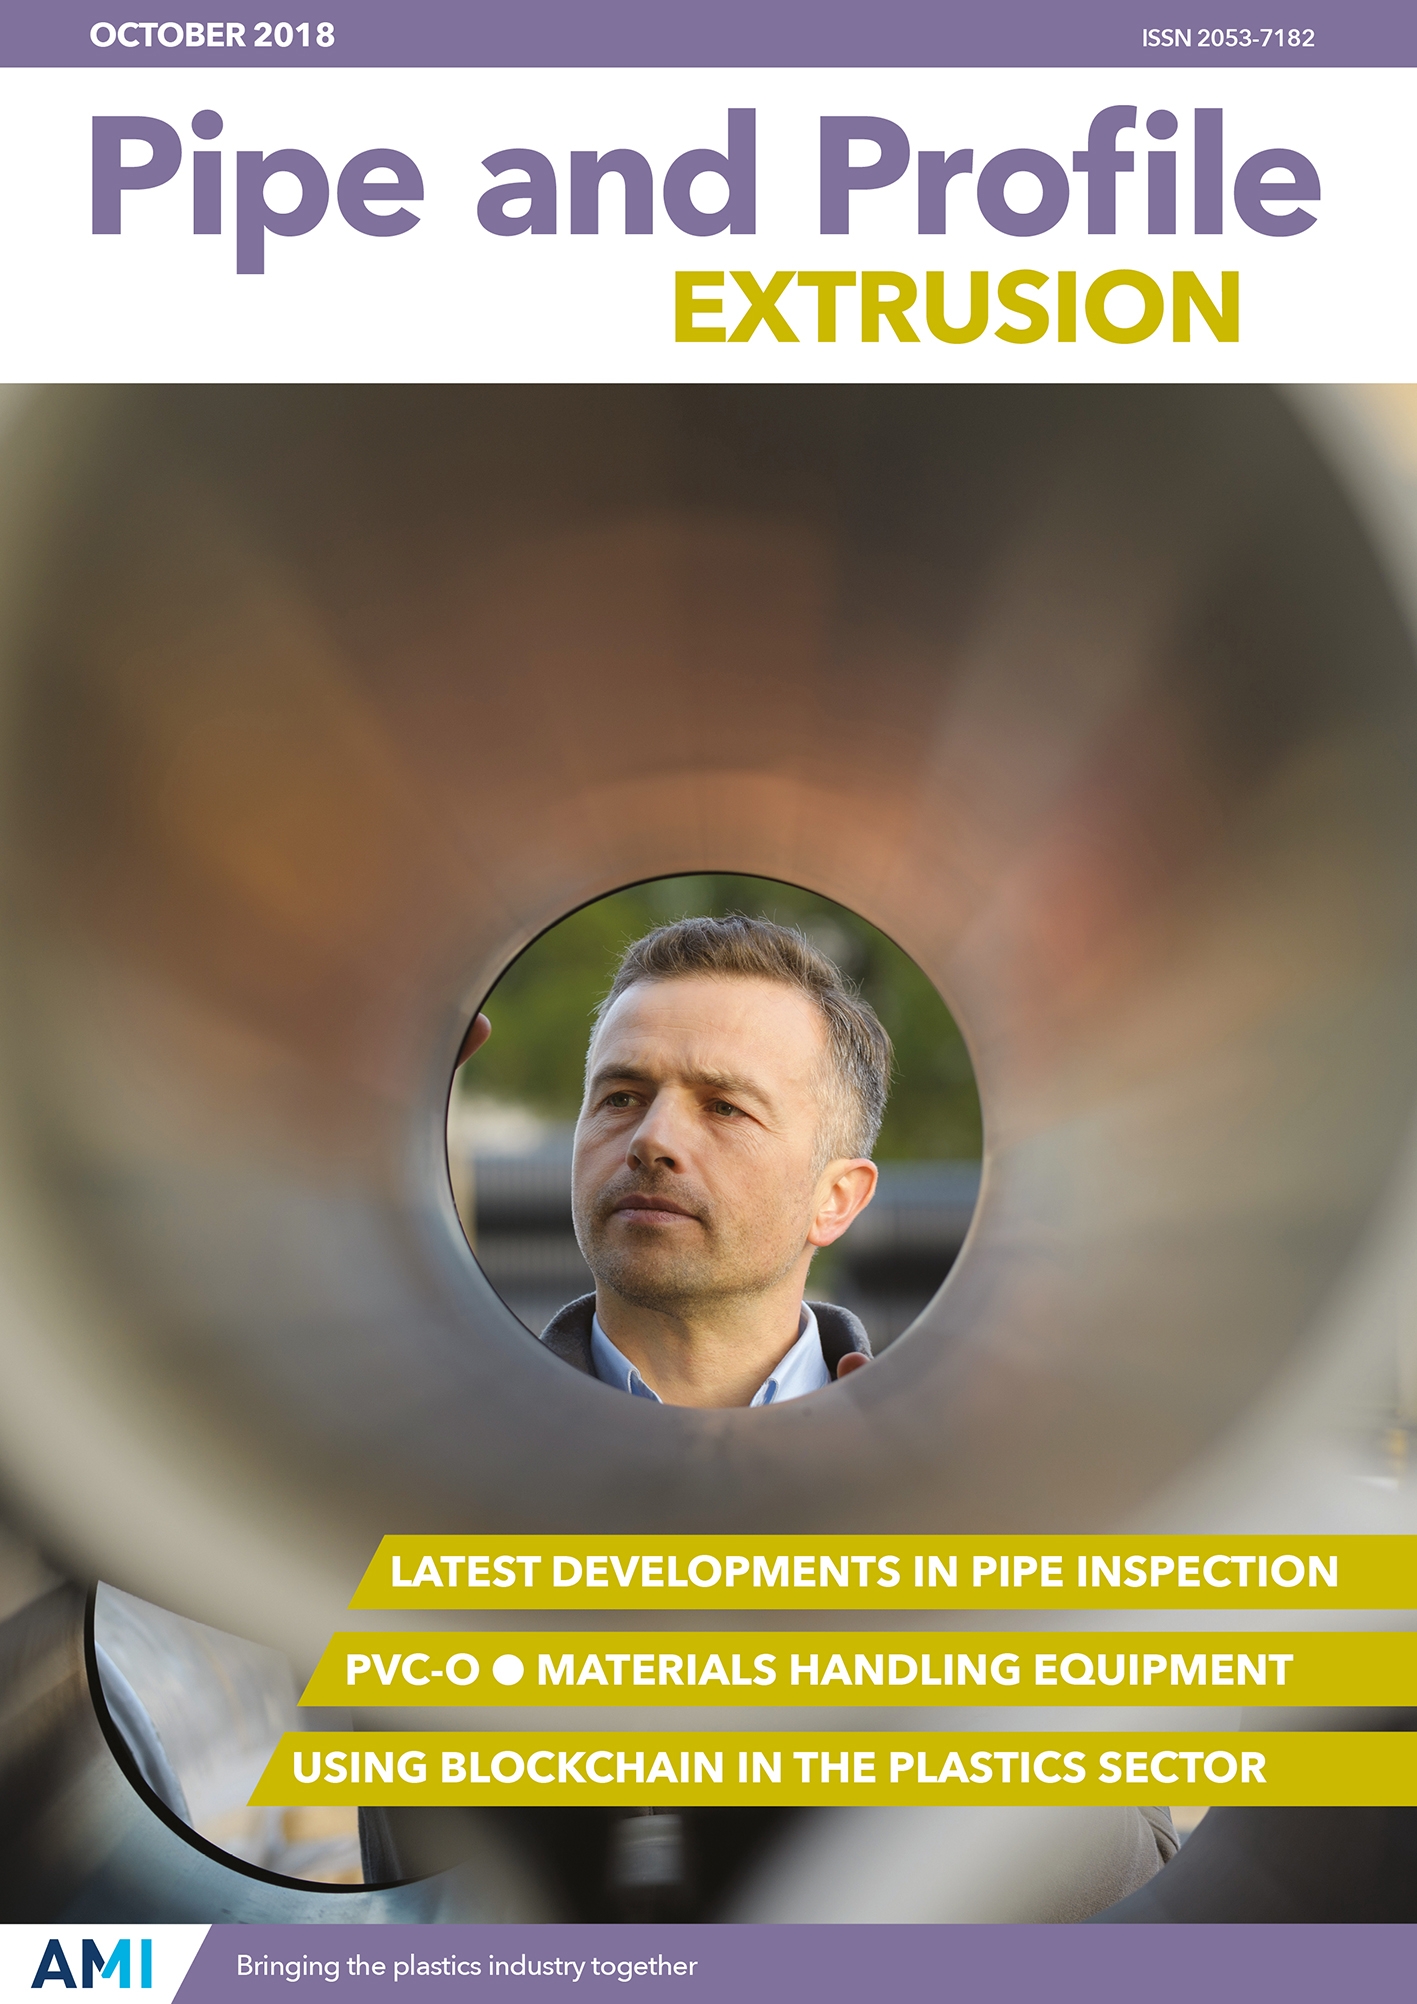 Pipe and Profile Extrusion October 2018